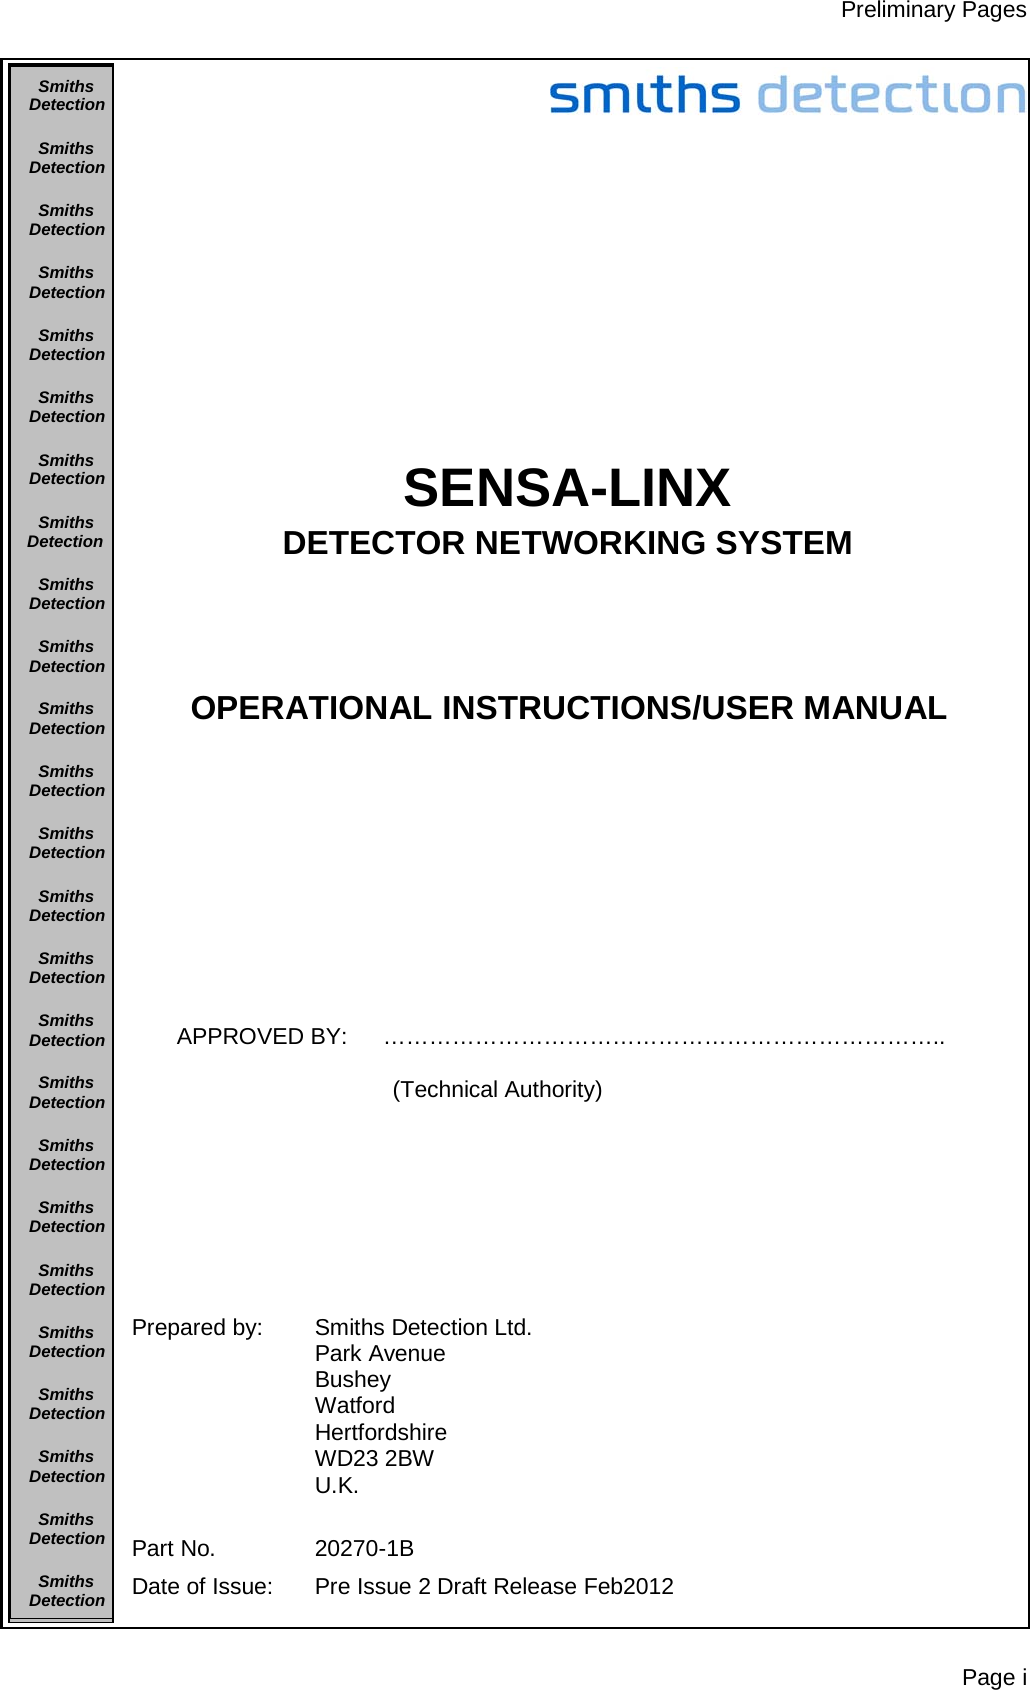 Preliminary Pages Page i               SENSA-LINX DETECTOR NETWORKING SYSTEM    OPERATIONAL INSTRUCTIONS/USER MANUAL           APPROVED BY:  ………………………………………………………………..    (Technical Authority)         Prepared by: Smiths Detection Ltd. Park Avenue Bushey Watford Hertfordshire WD23 2BW U.K.   Part No. 20270-1B Date of Issue:  Pre Issue 2 Draft Release Feb2012 SmithsDetectionSmithsDetectionSmithsDetectionSmithsDetectionSmithsDetectionSmithsDetectionSmithsDetectionSmithsDetectionSmithsDetectionSmithsDetectionSmithsDetectionSmithsDetectionSmithsDetectionSmithsDetectionSmithsDetectionSmithsDetectionSmithsDetectionSmithsDetectionSmithsDetectionSmithsDetectionSmithsDetectionSmithsDetectionSmithsDetectionSmithsDetectionSmithsDetection  